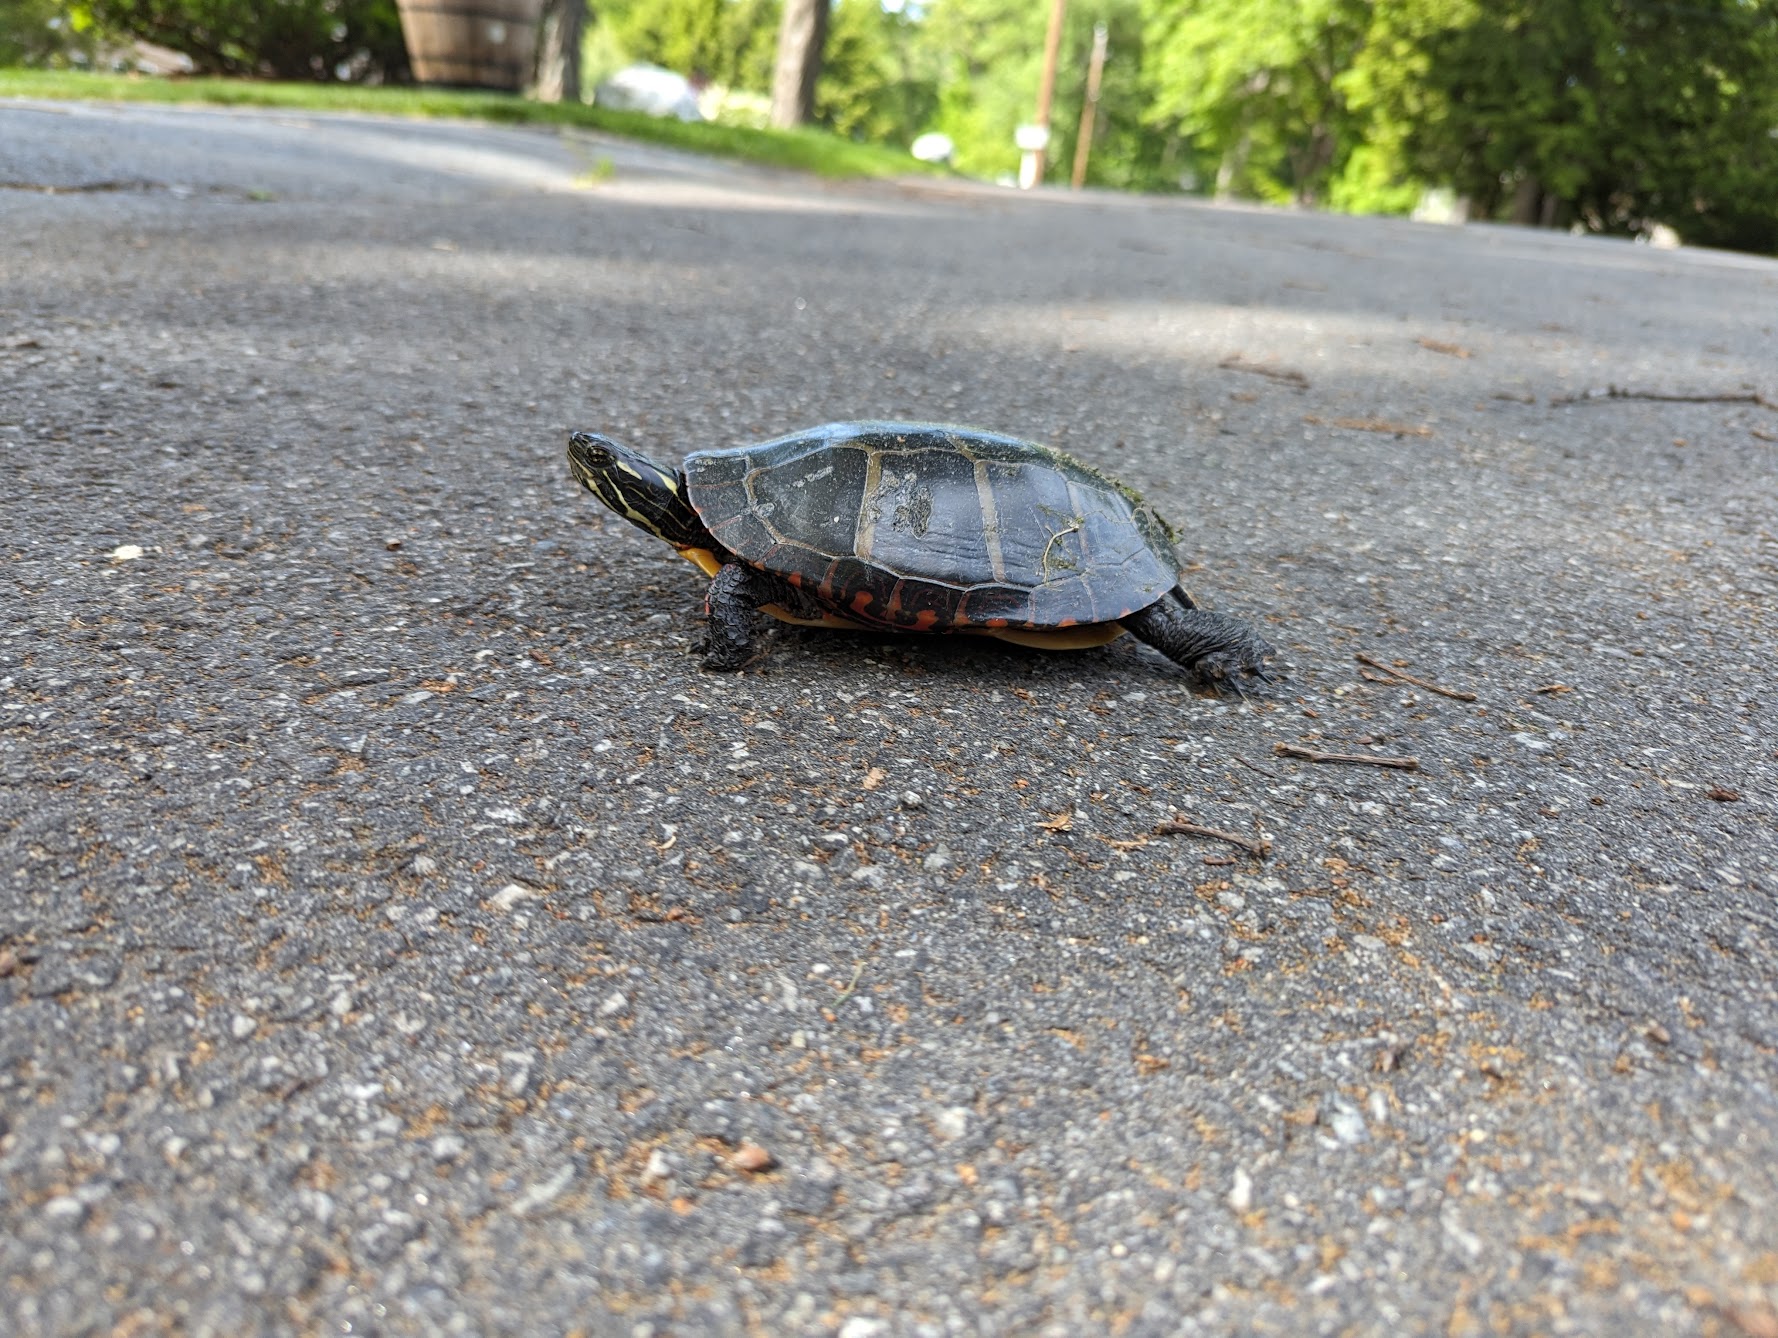 Why’d the turtle cross the road?